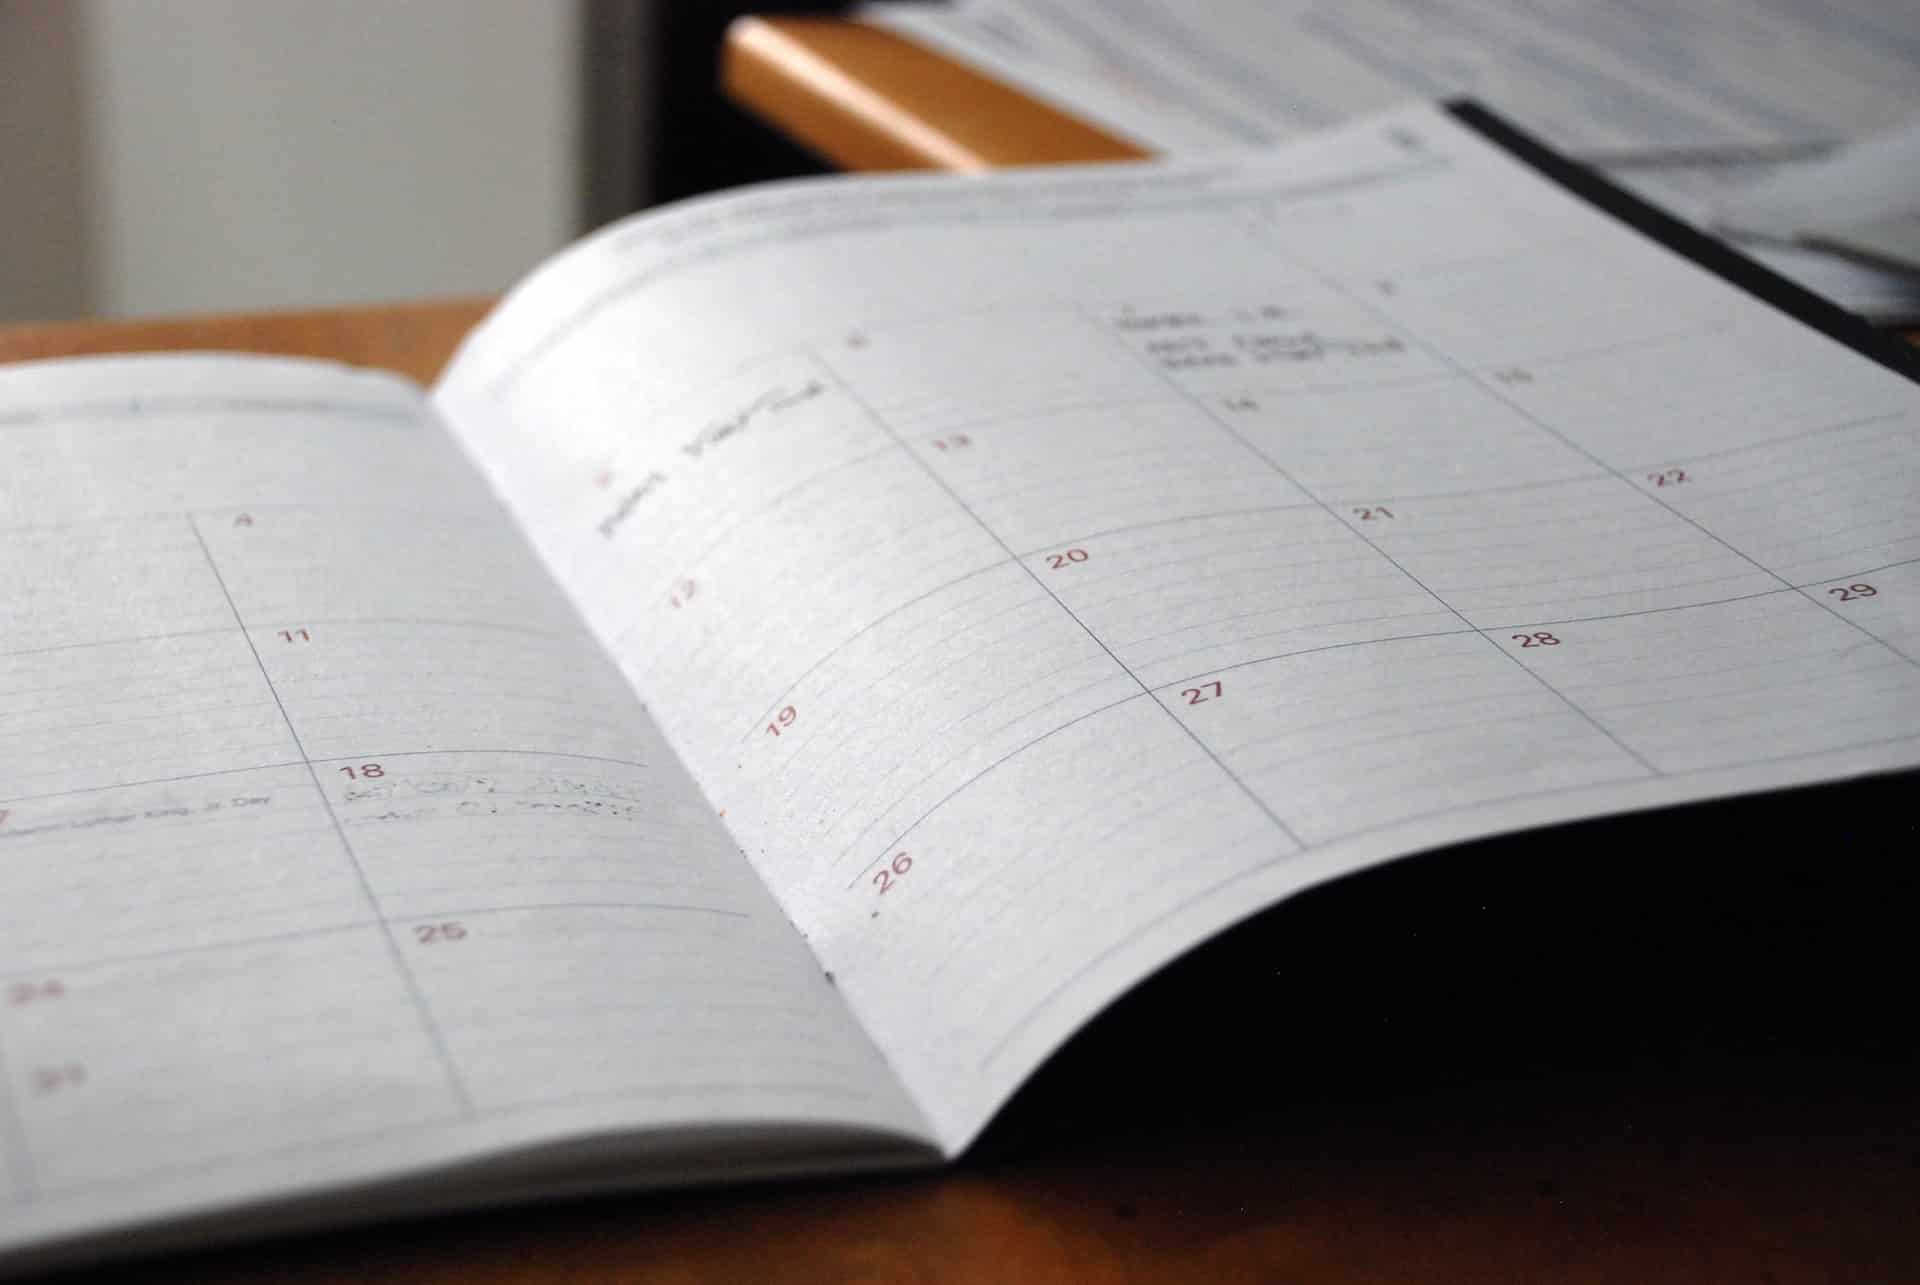 A dayplanner open on a desk, representing scheduling mandatory mediations in Ontario